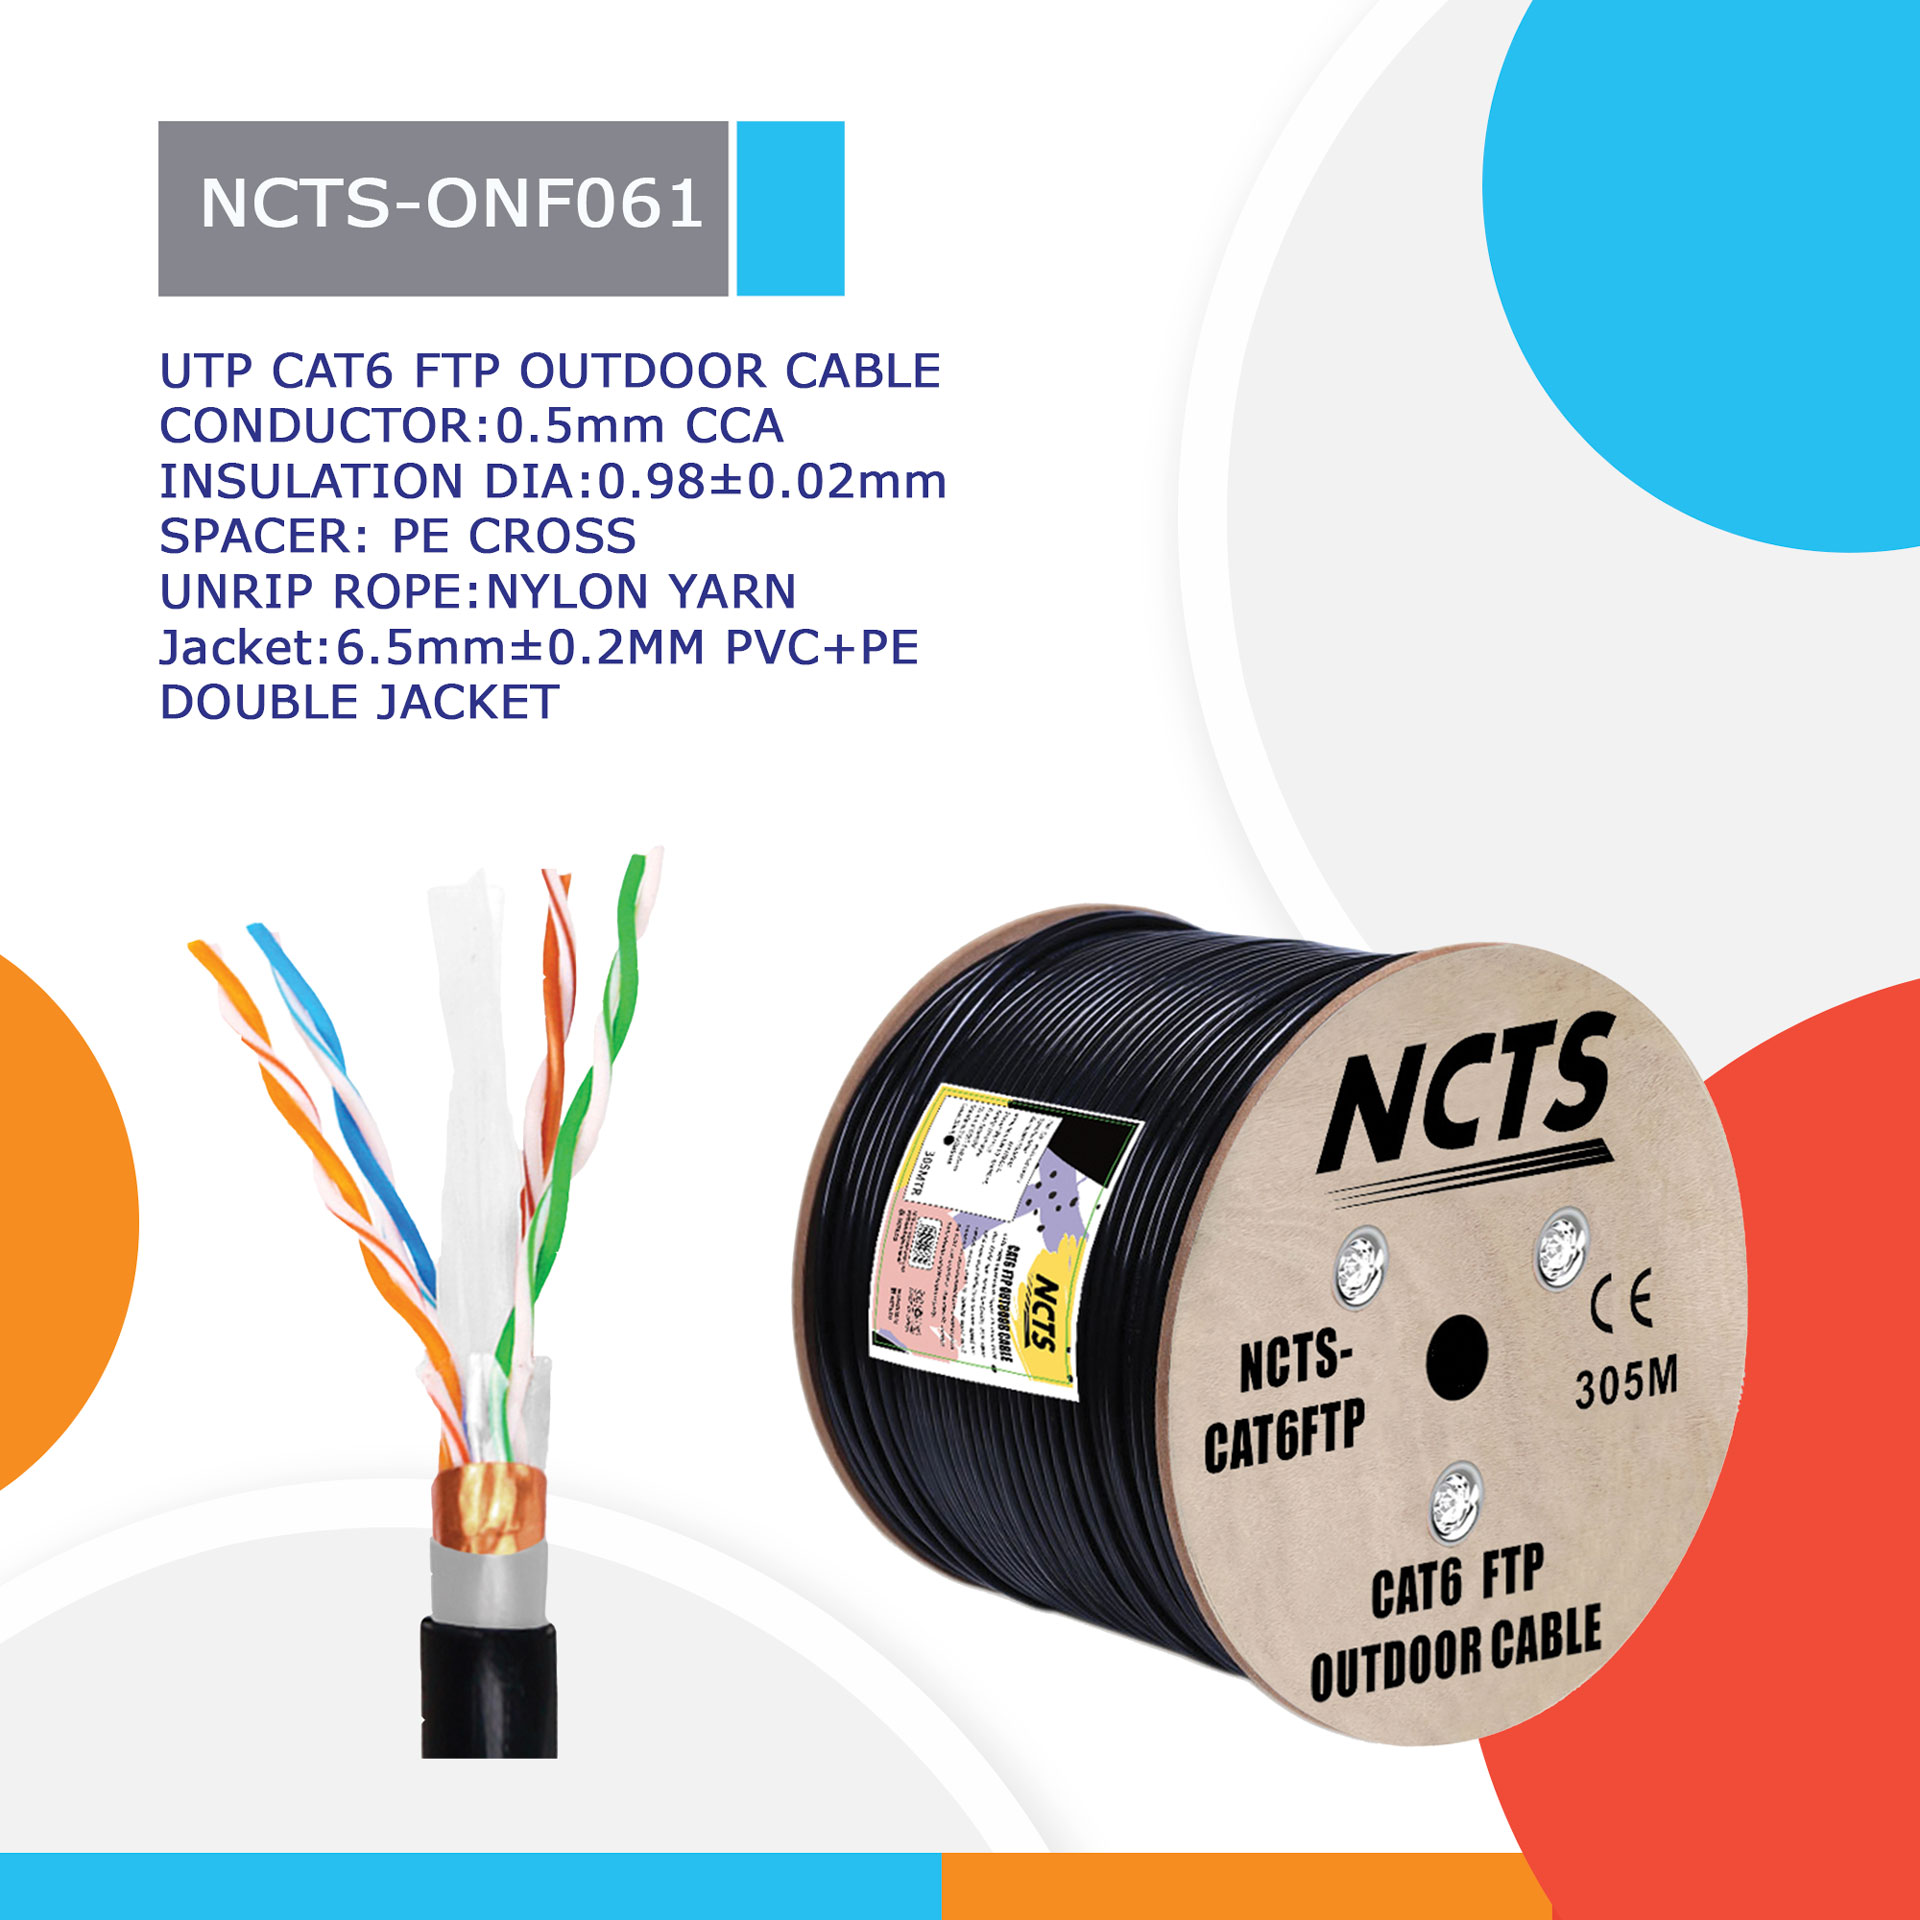 NCTS-ONF061